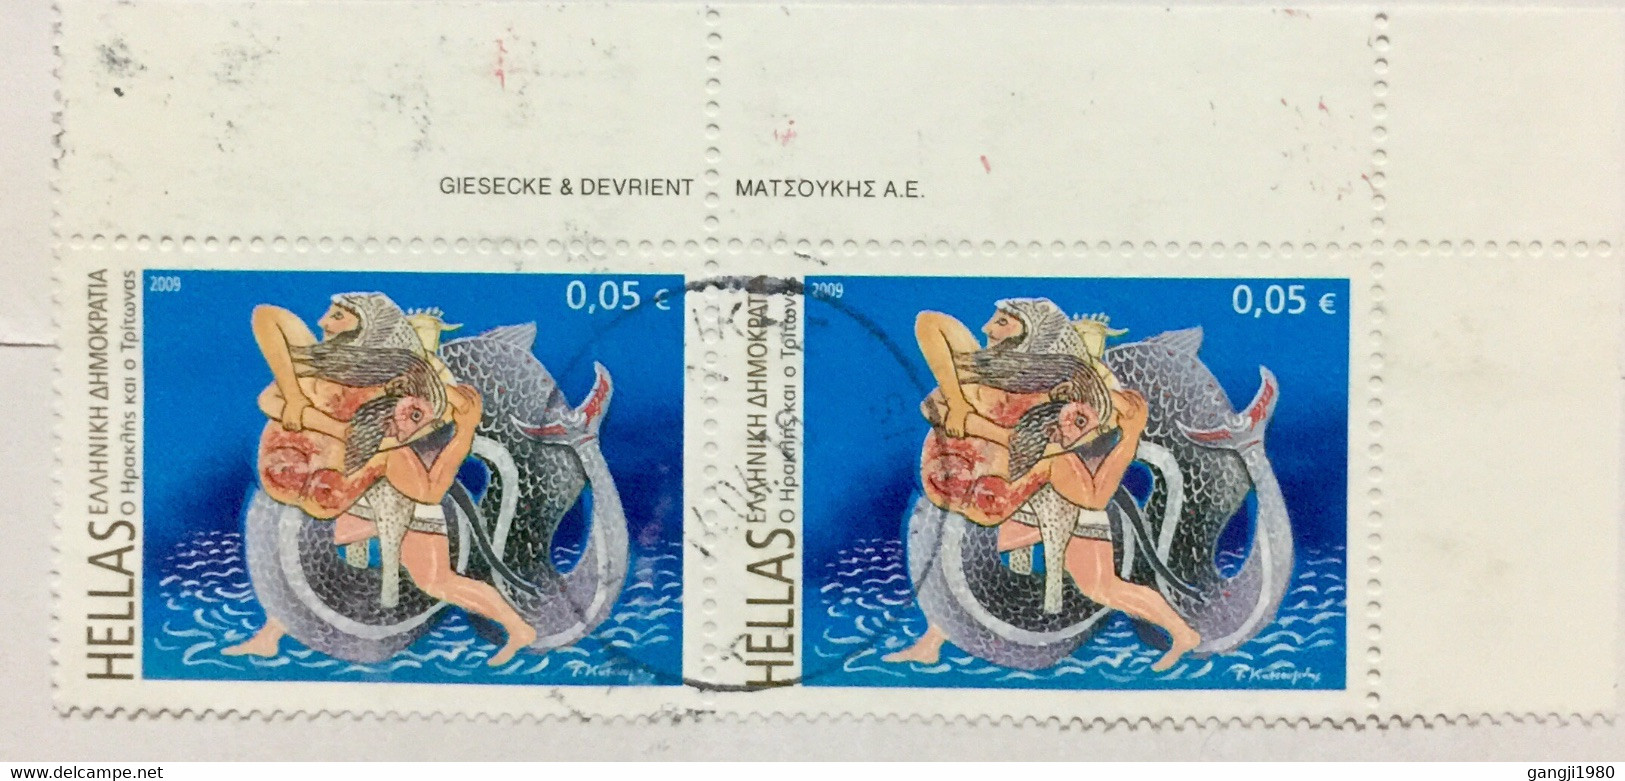 GREECE 2009, USED 4 STAMPS REGISTERED COVER TO U.K ,SHIP BALLON ,EUROPA,ART ,FISH,MAN ,WOMEN,PAINTING ART ,SEA ,WATER ,T - Lettres & Documents